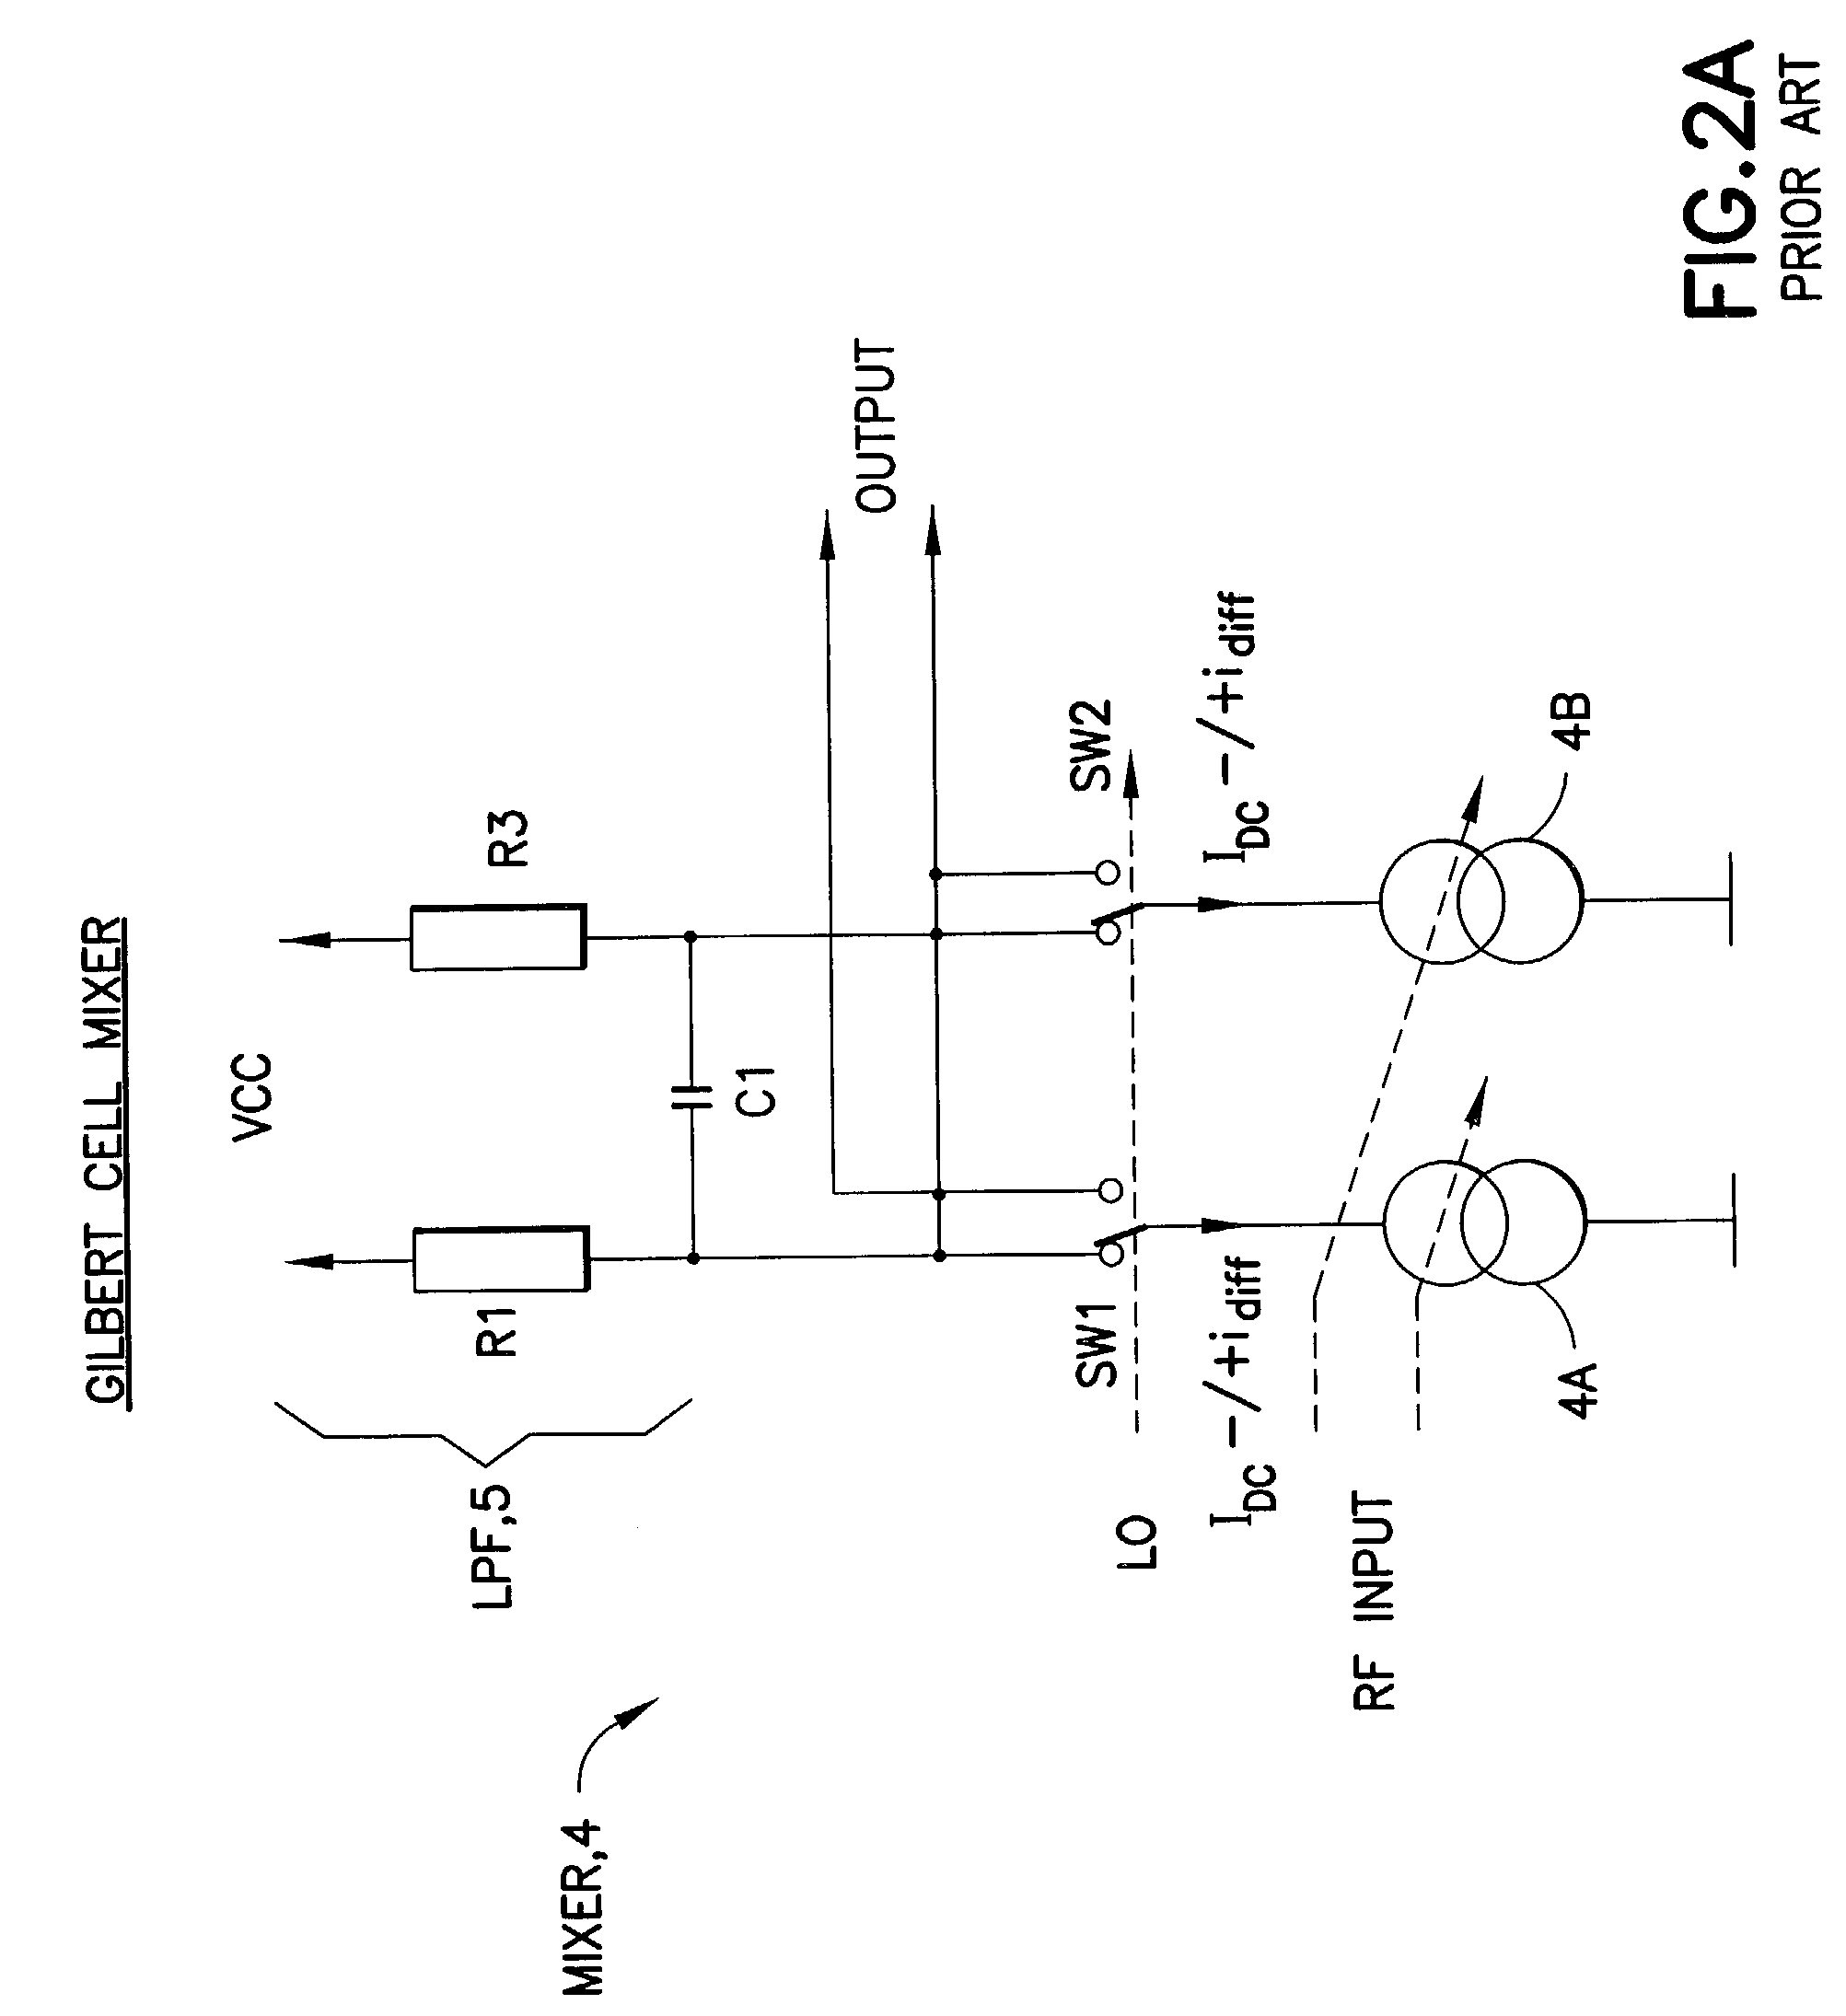 Direct conversion receiver having a low pass pole implemented with an active low pass filter